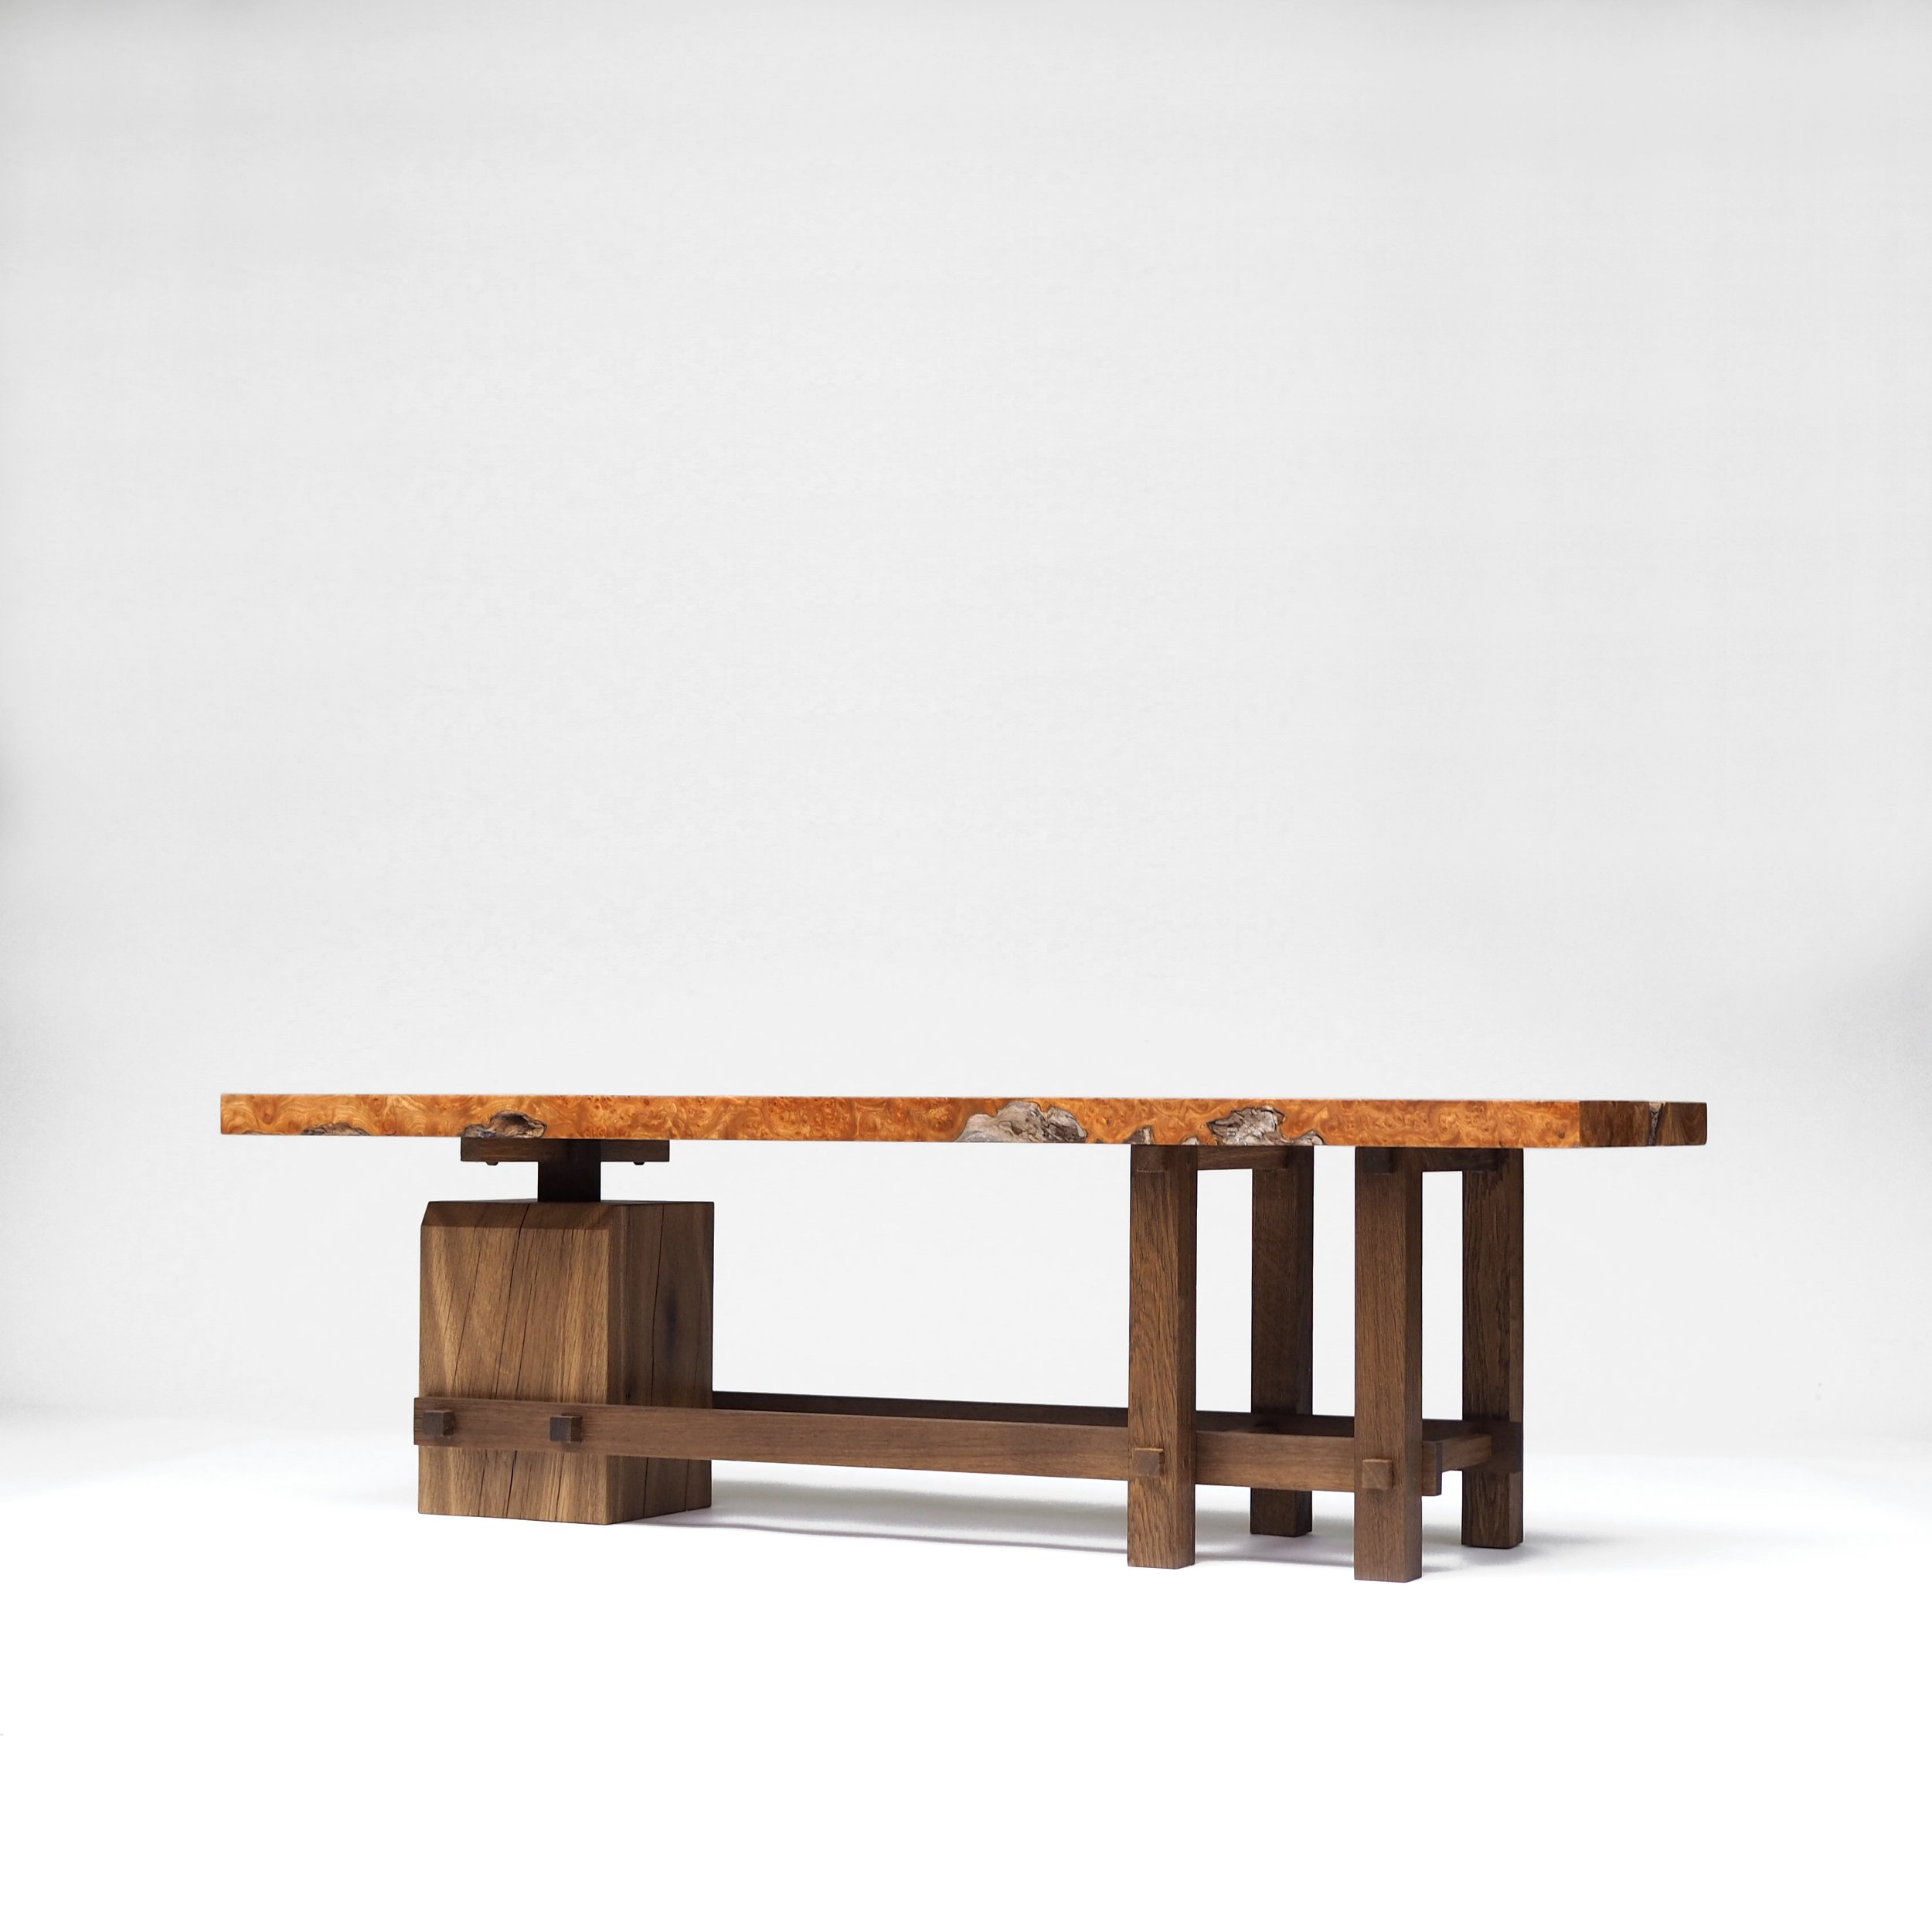 Oliver Milne - brace coffee table high res.jpg